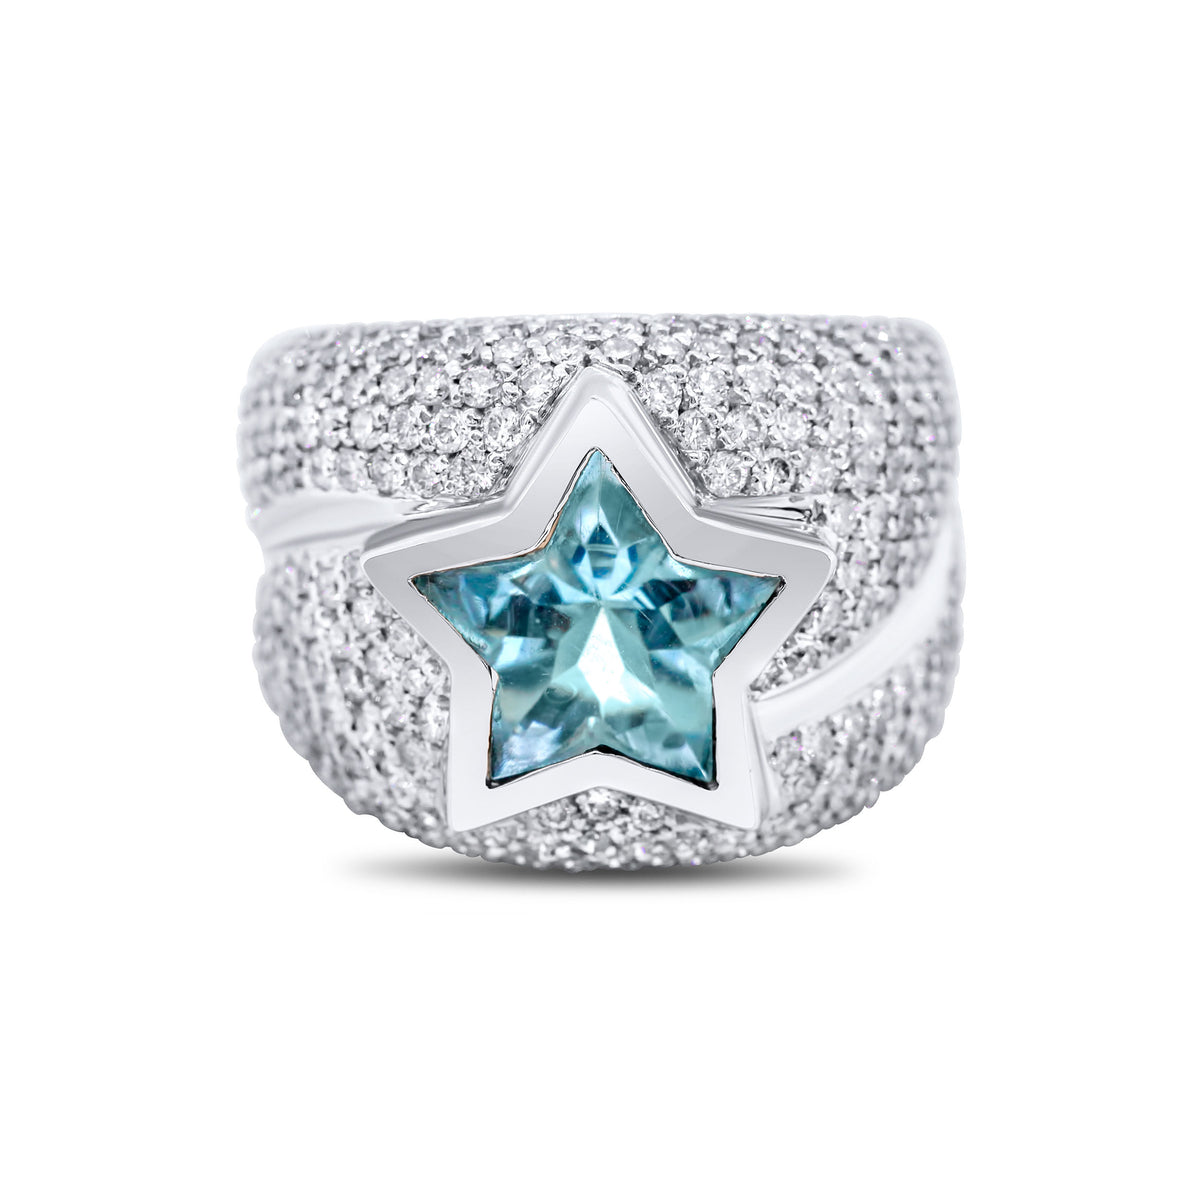 North Star Cocktail Ring with Aquamarine